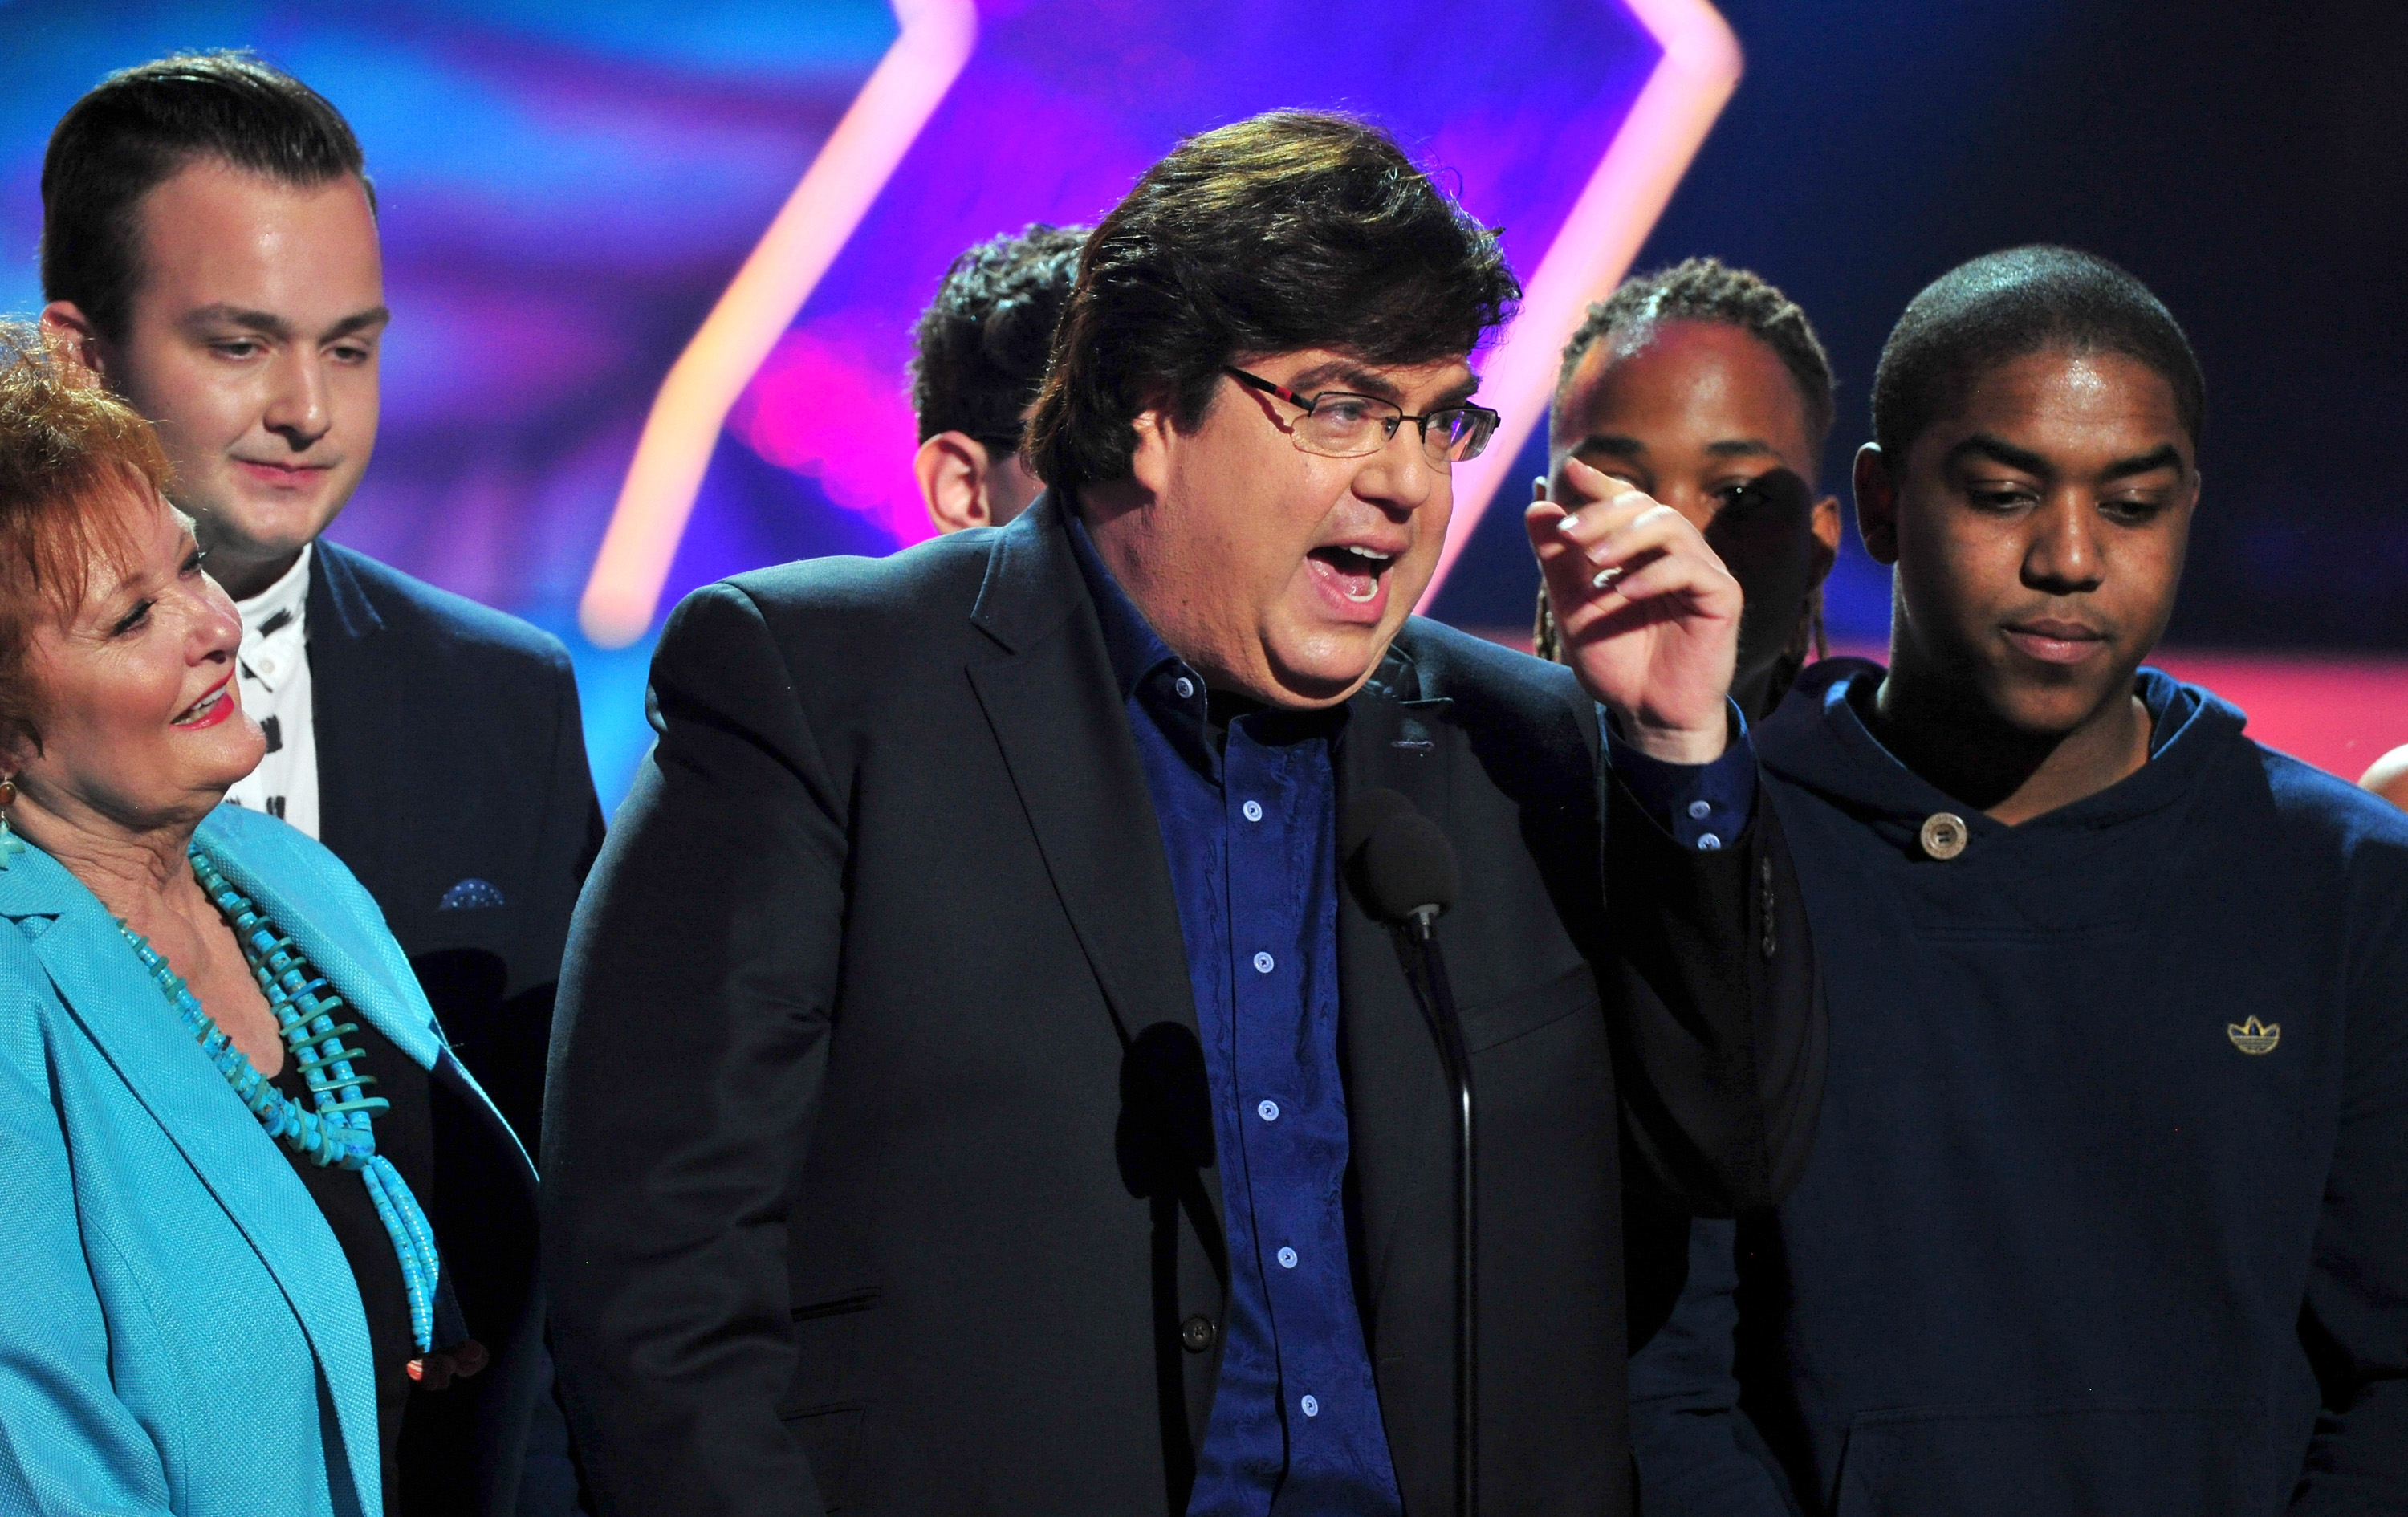 Producer Dan Schneider denied any allegations made in the doc